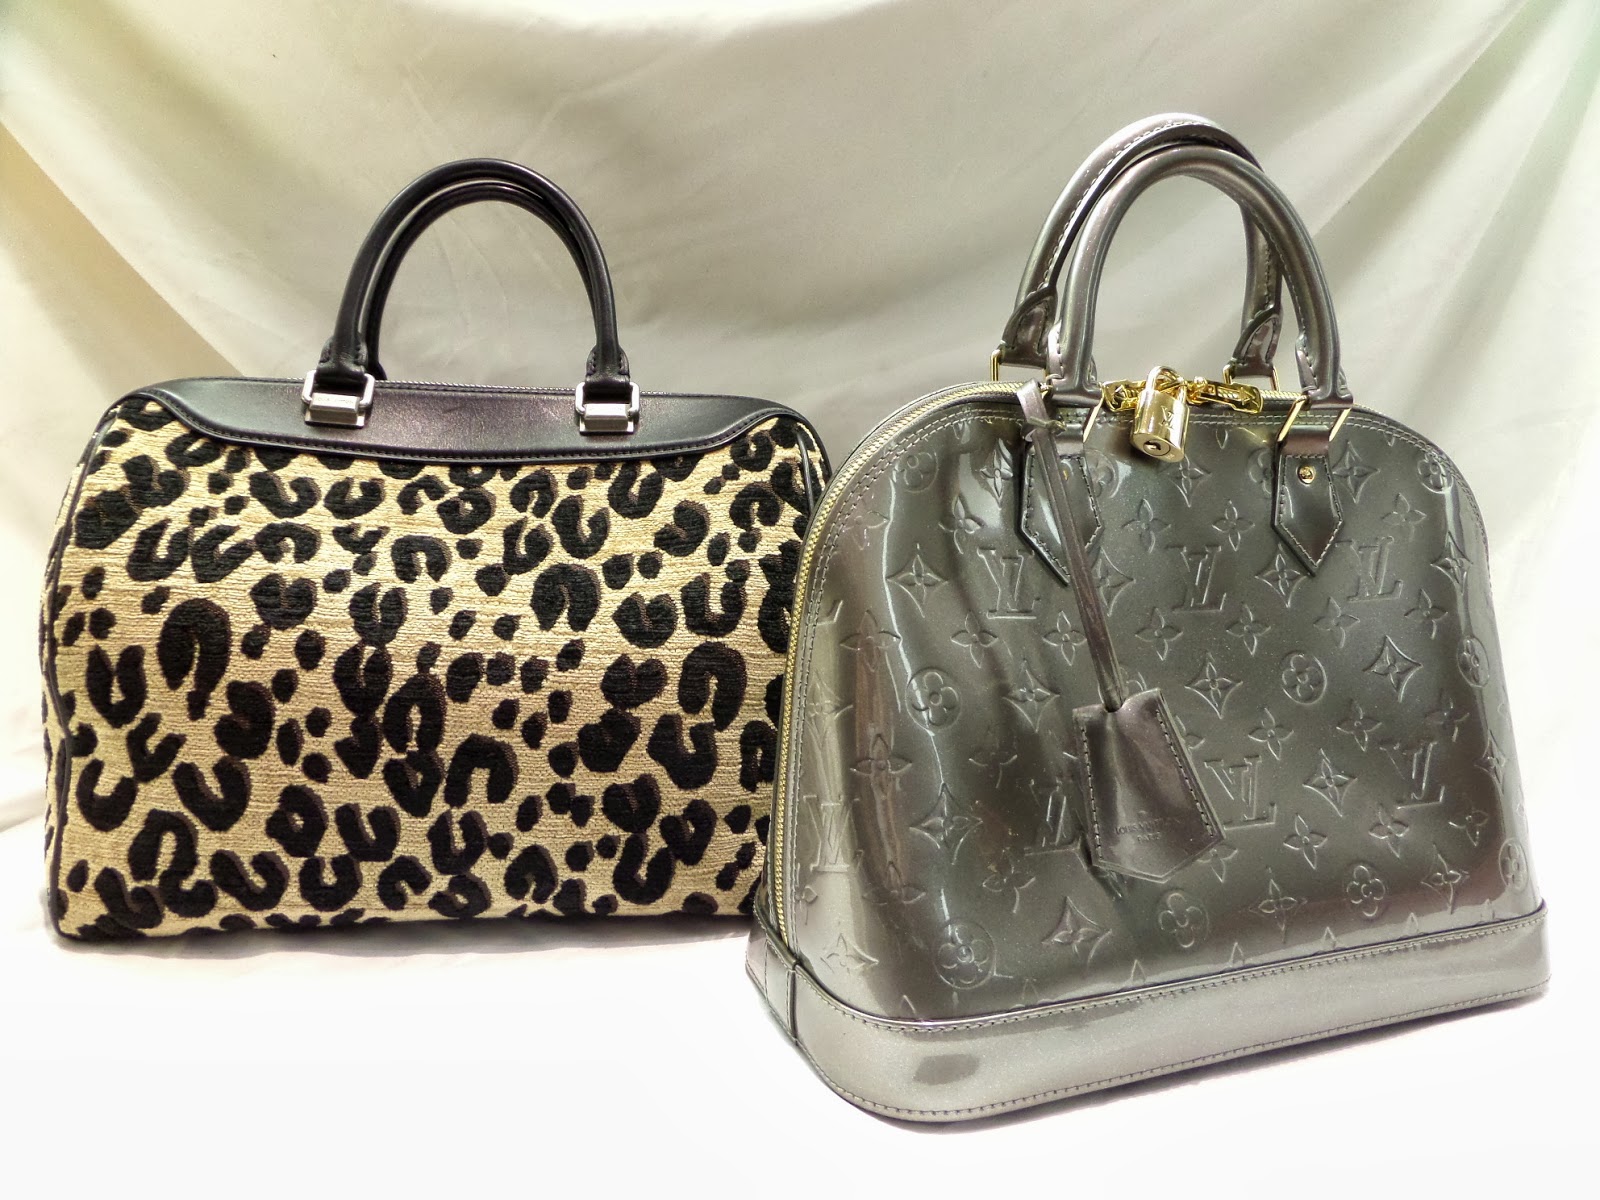 Vancouver Luxury Designer Consignment Shop: Sop Authentic Pre-owned Louis Vuitton at Once Again ...